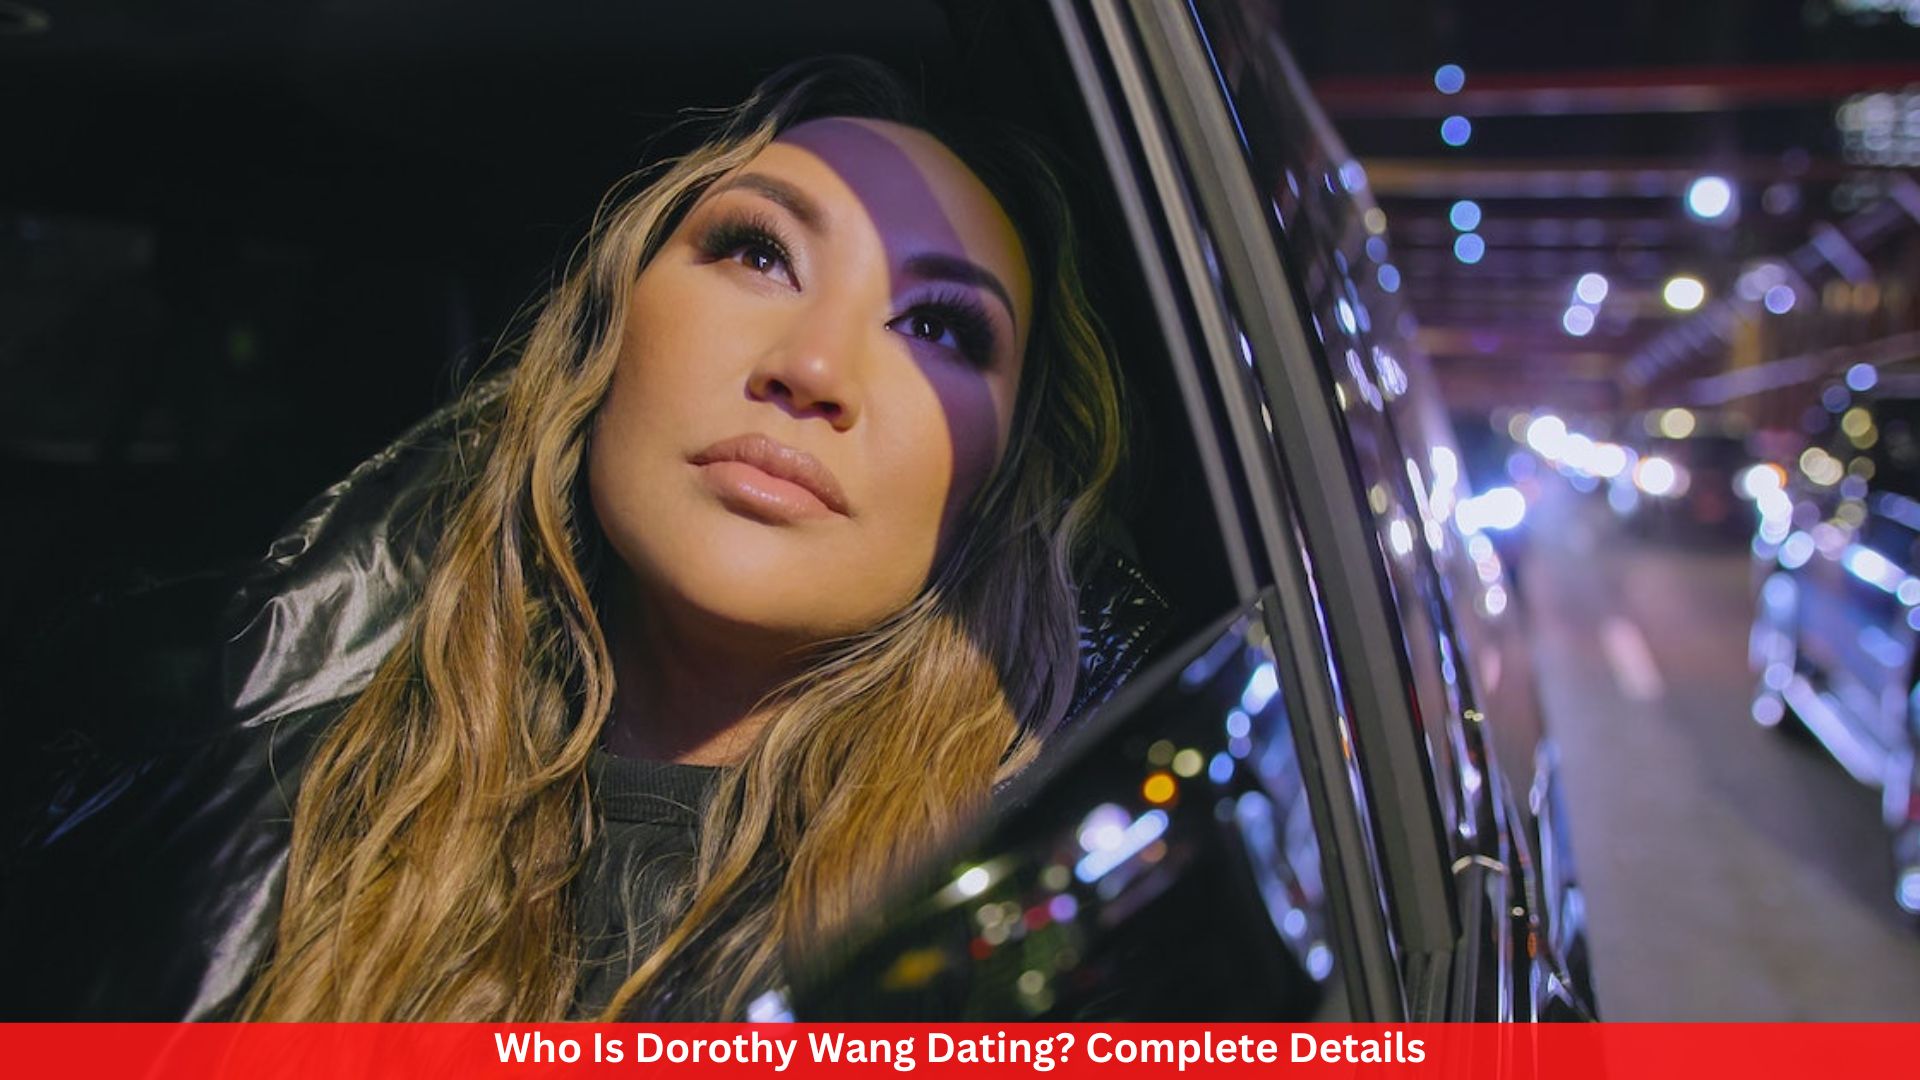 Who Is Dorothy Wang Dating? Complete Details